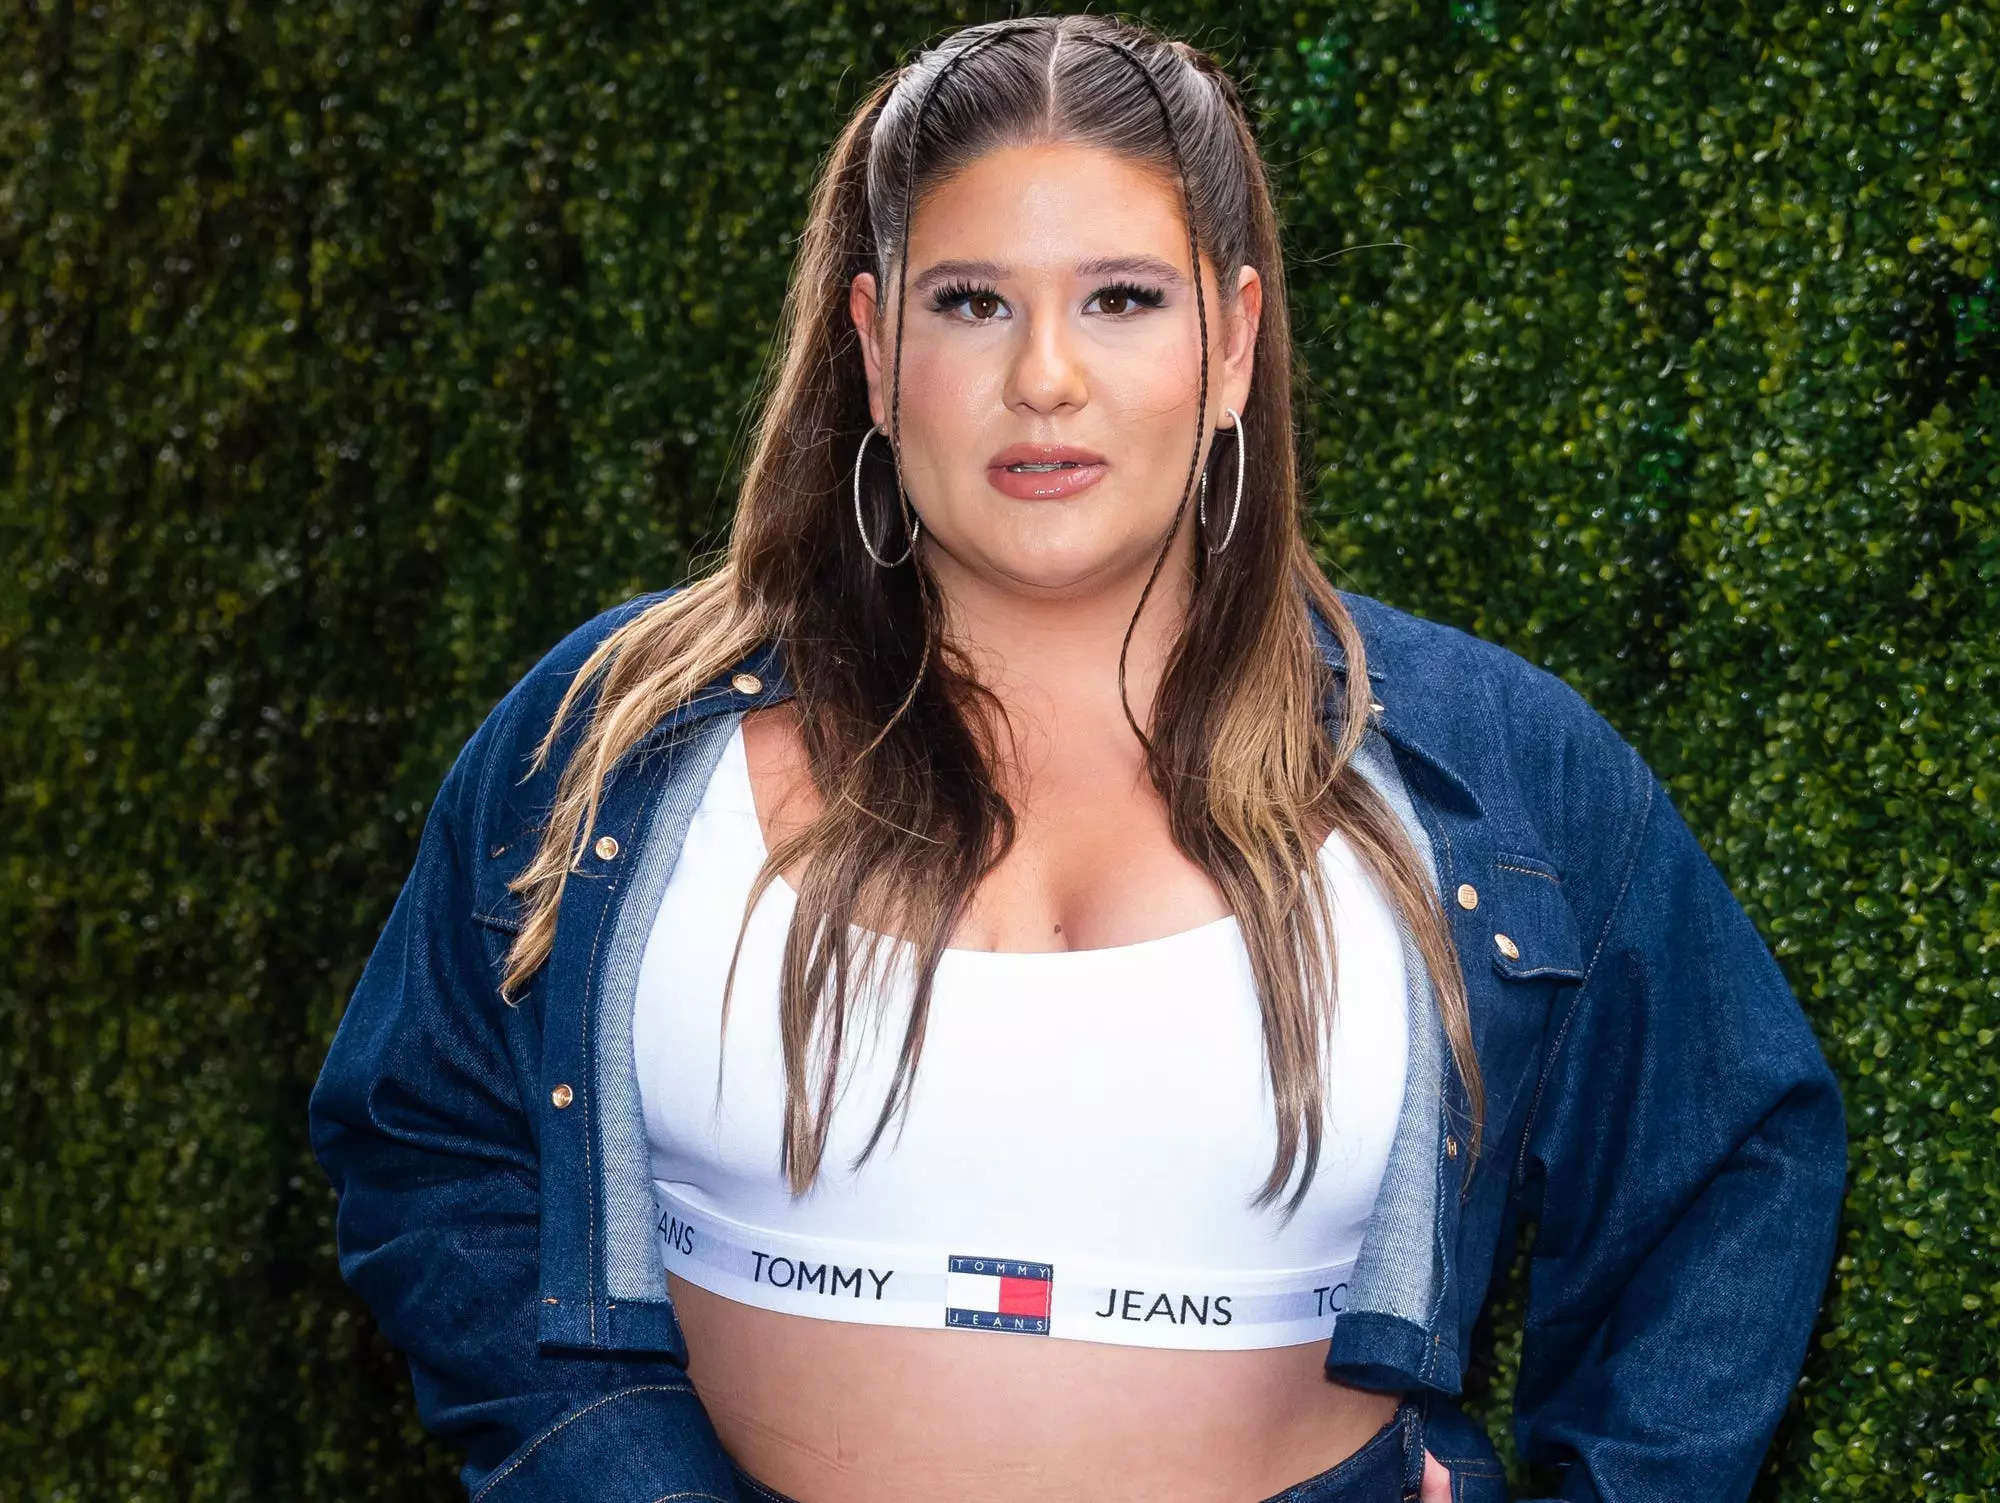 Influencer Remi Bader Shared Her Struggles With Binge Eating But Says Followers Responded With